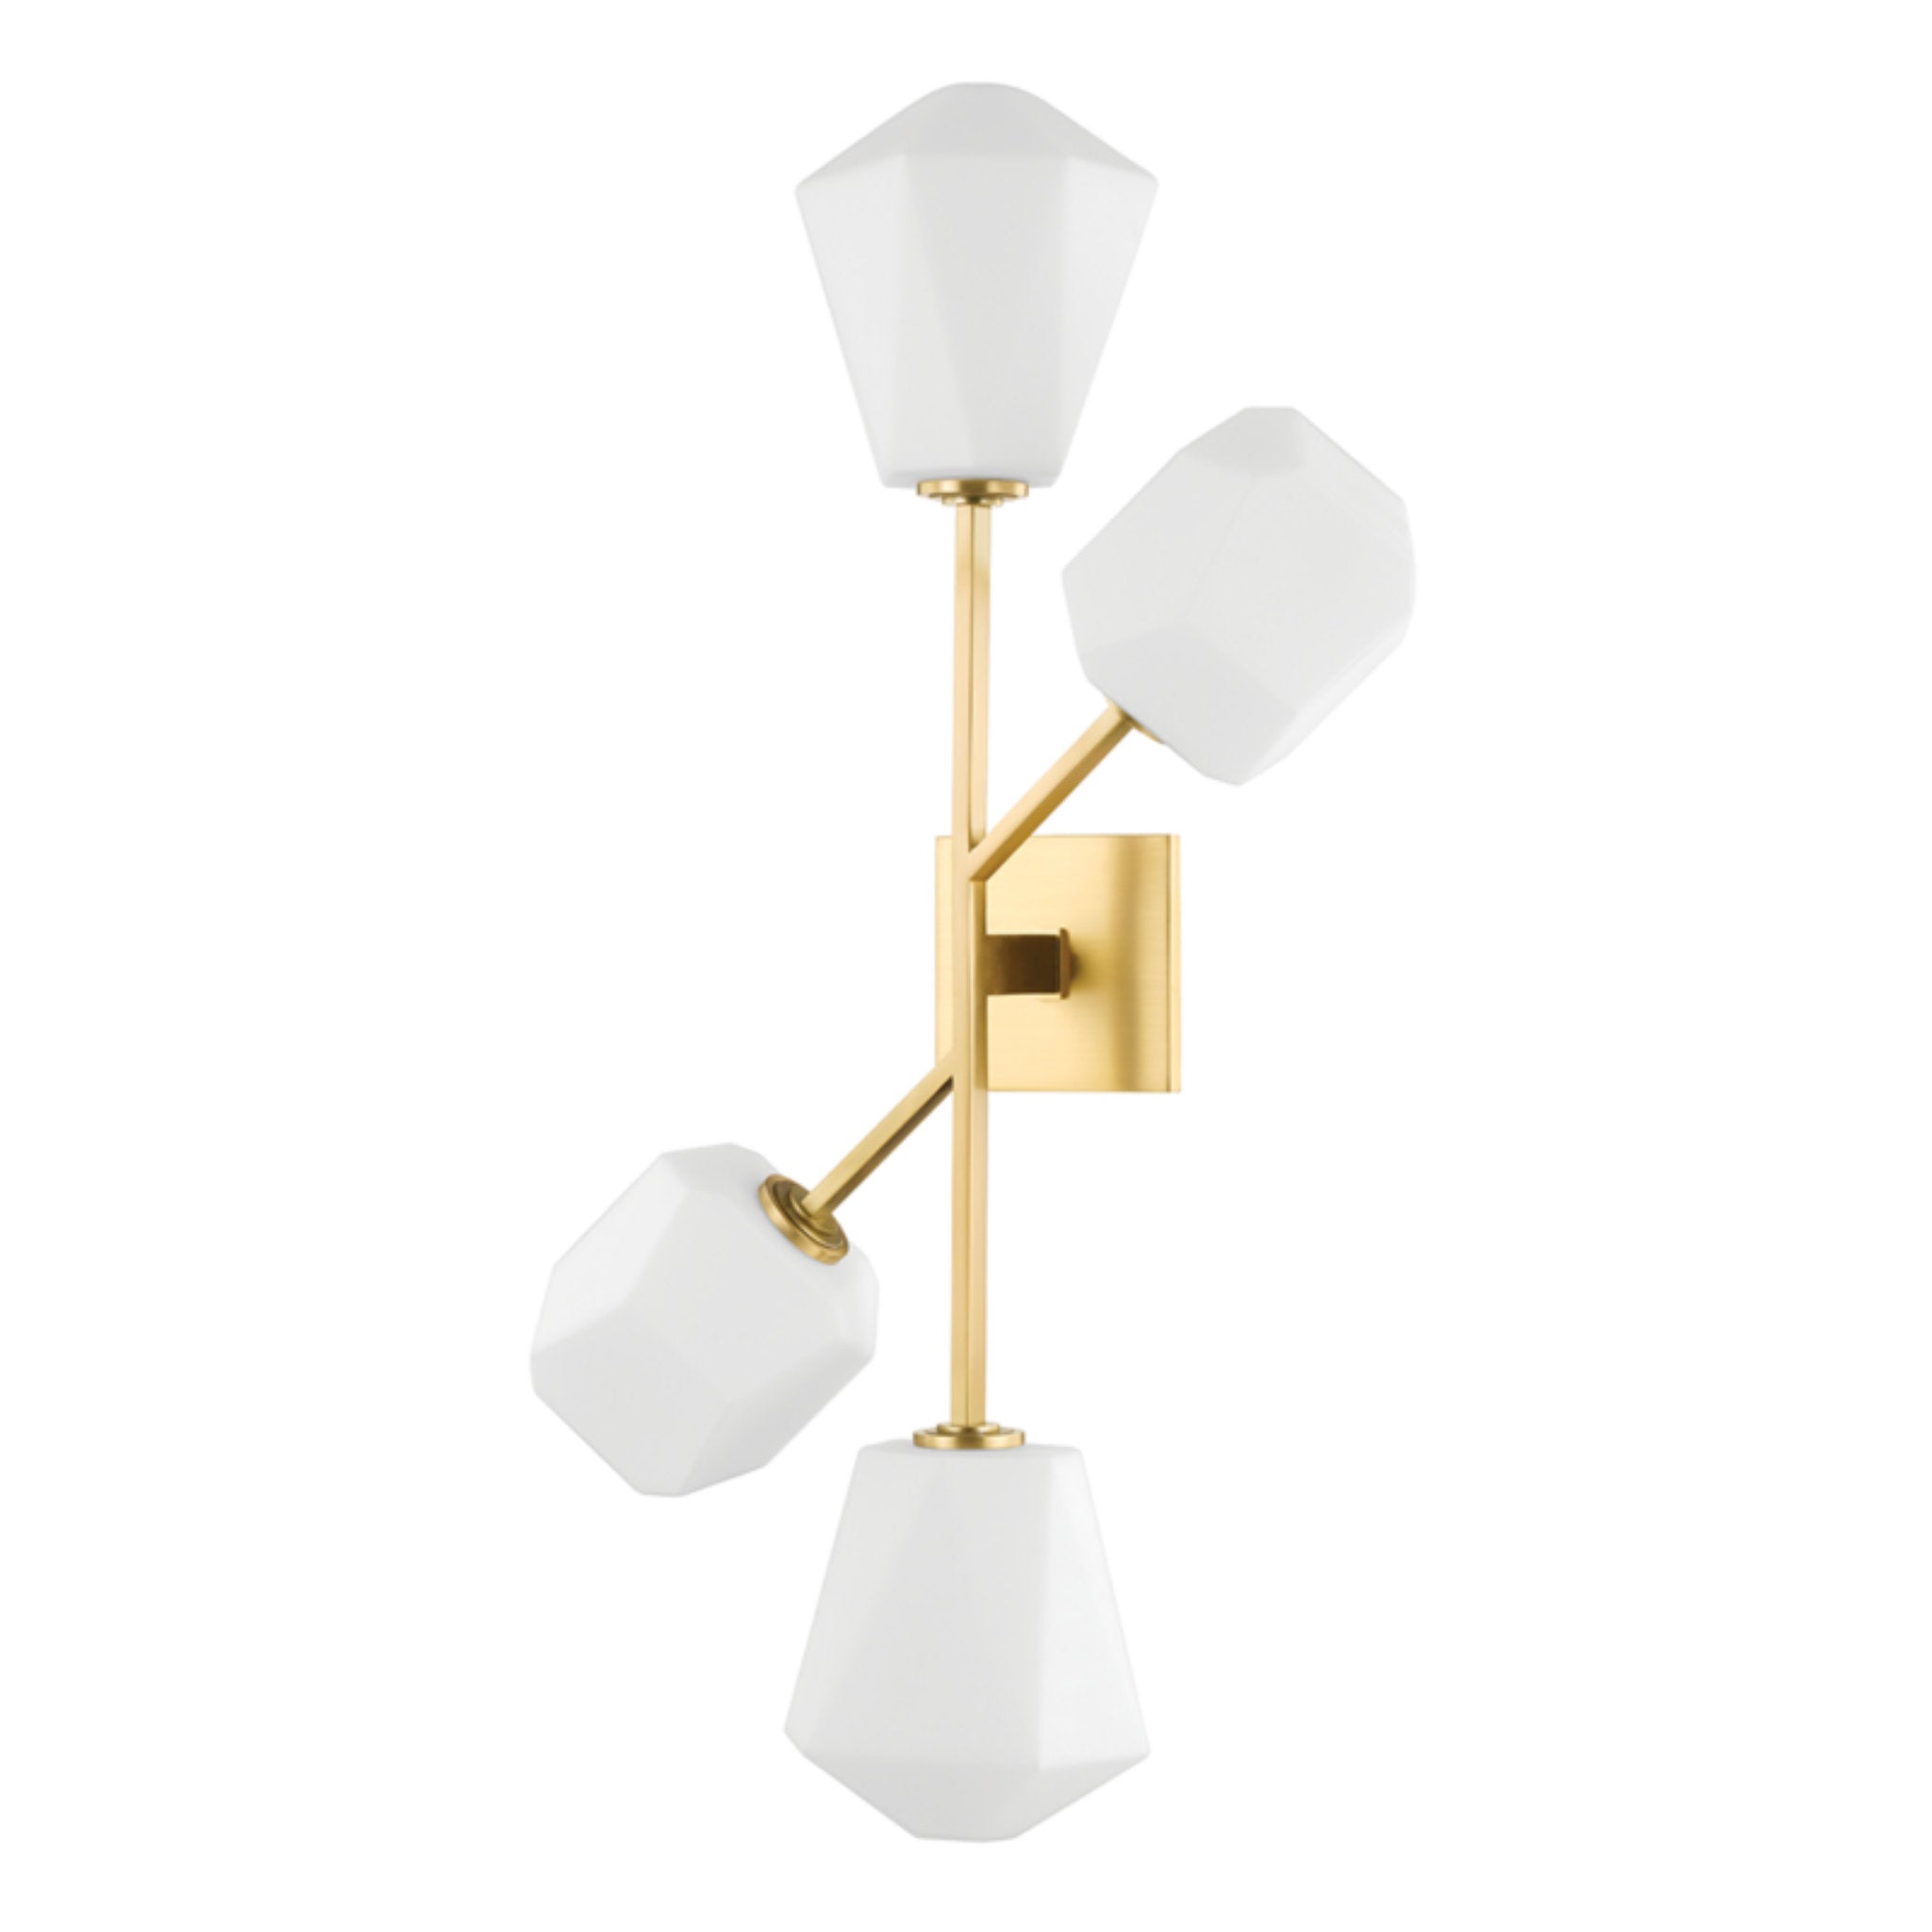 Tring 4 Light Wall Sconce in Aged Brass by Pembrooke & Ives